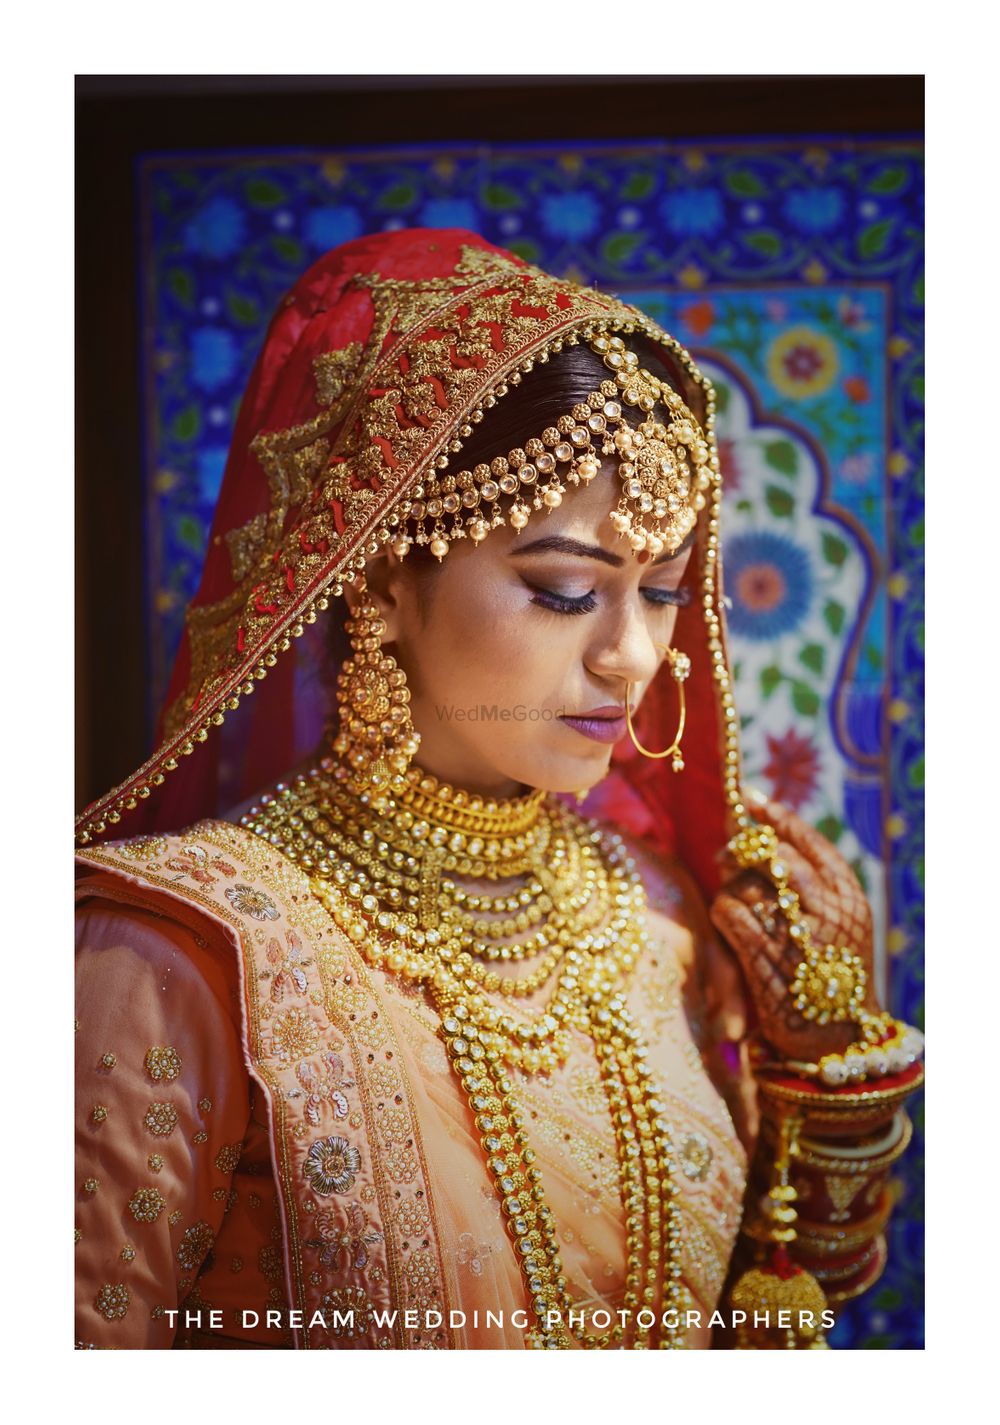 Photo of A beautiful bride at her wedding with amazing jewellery.